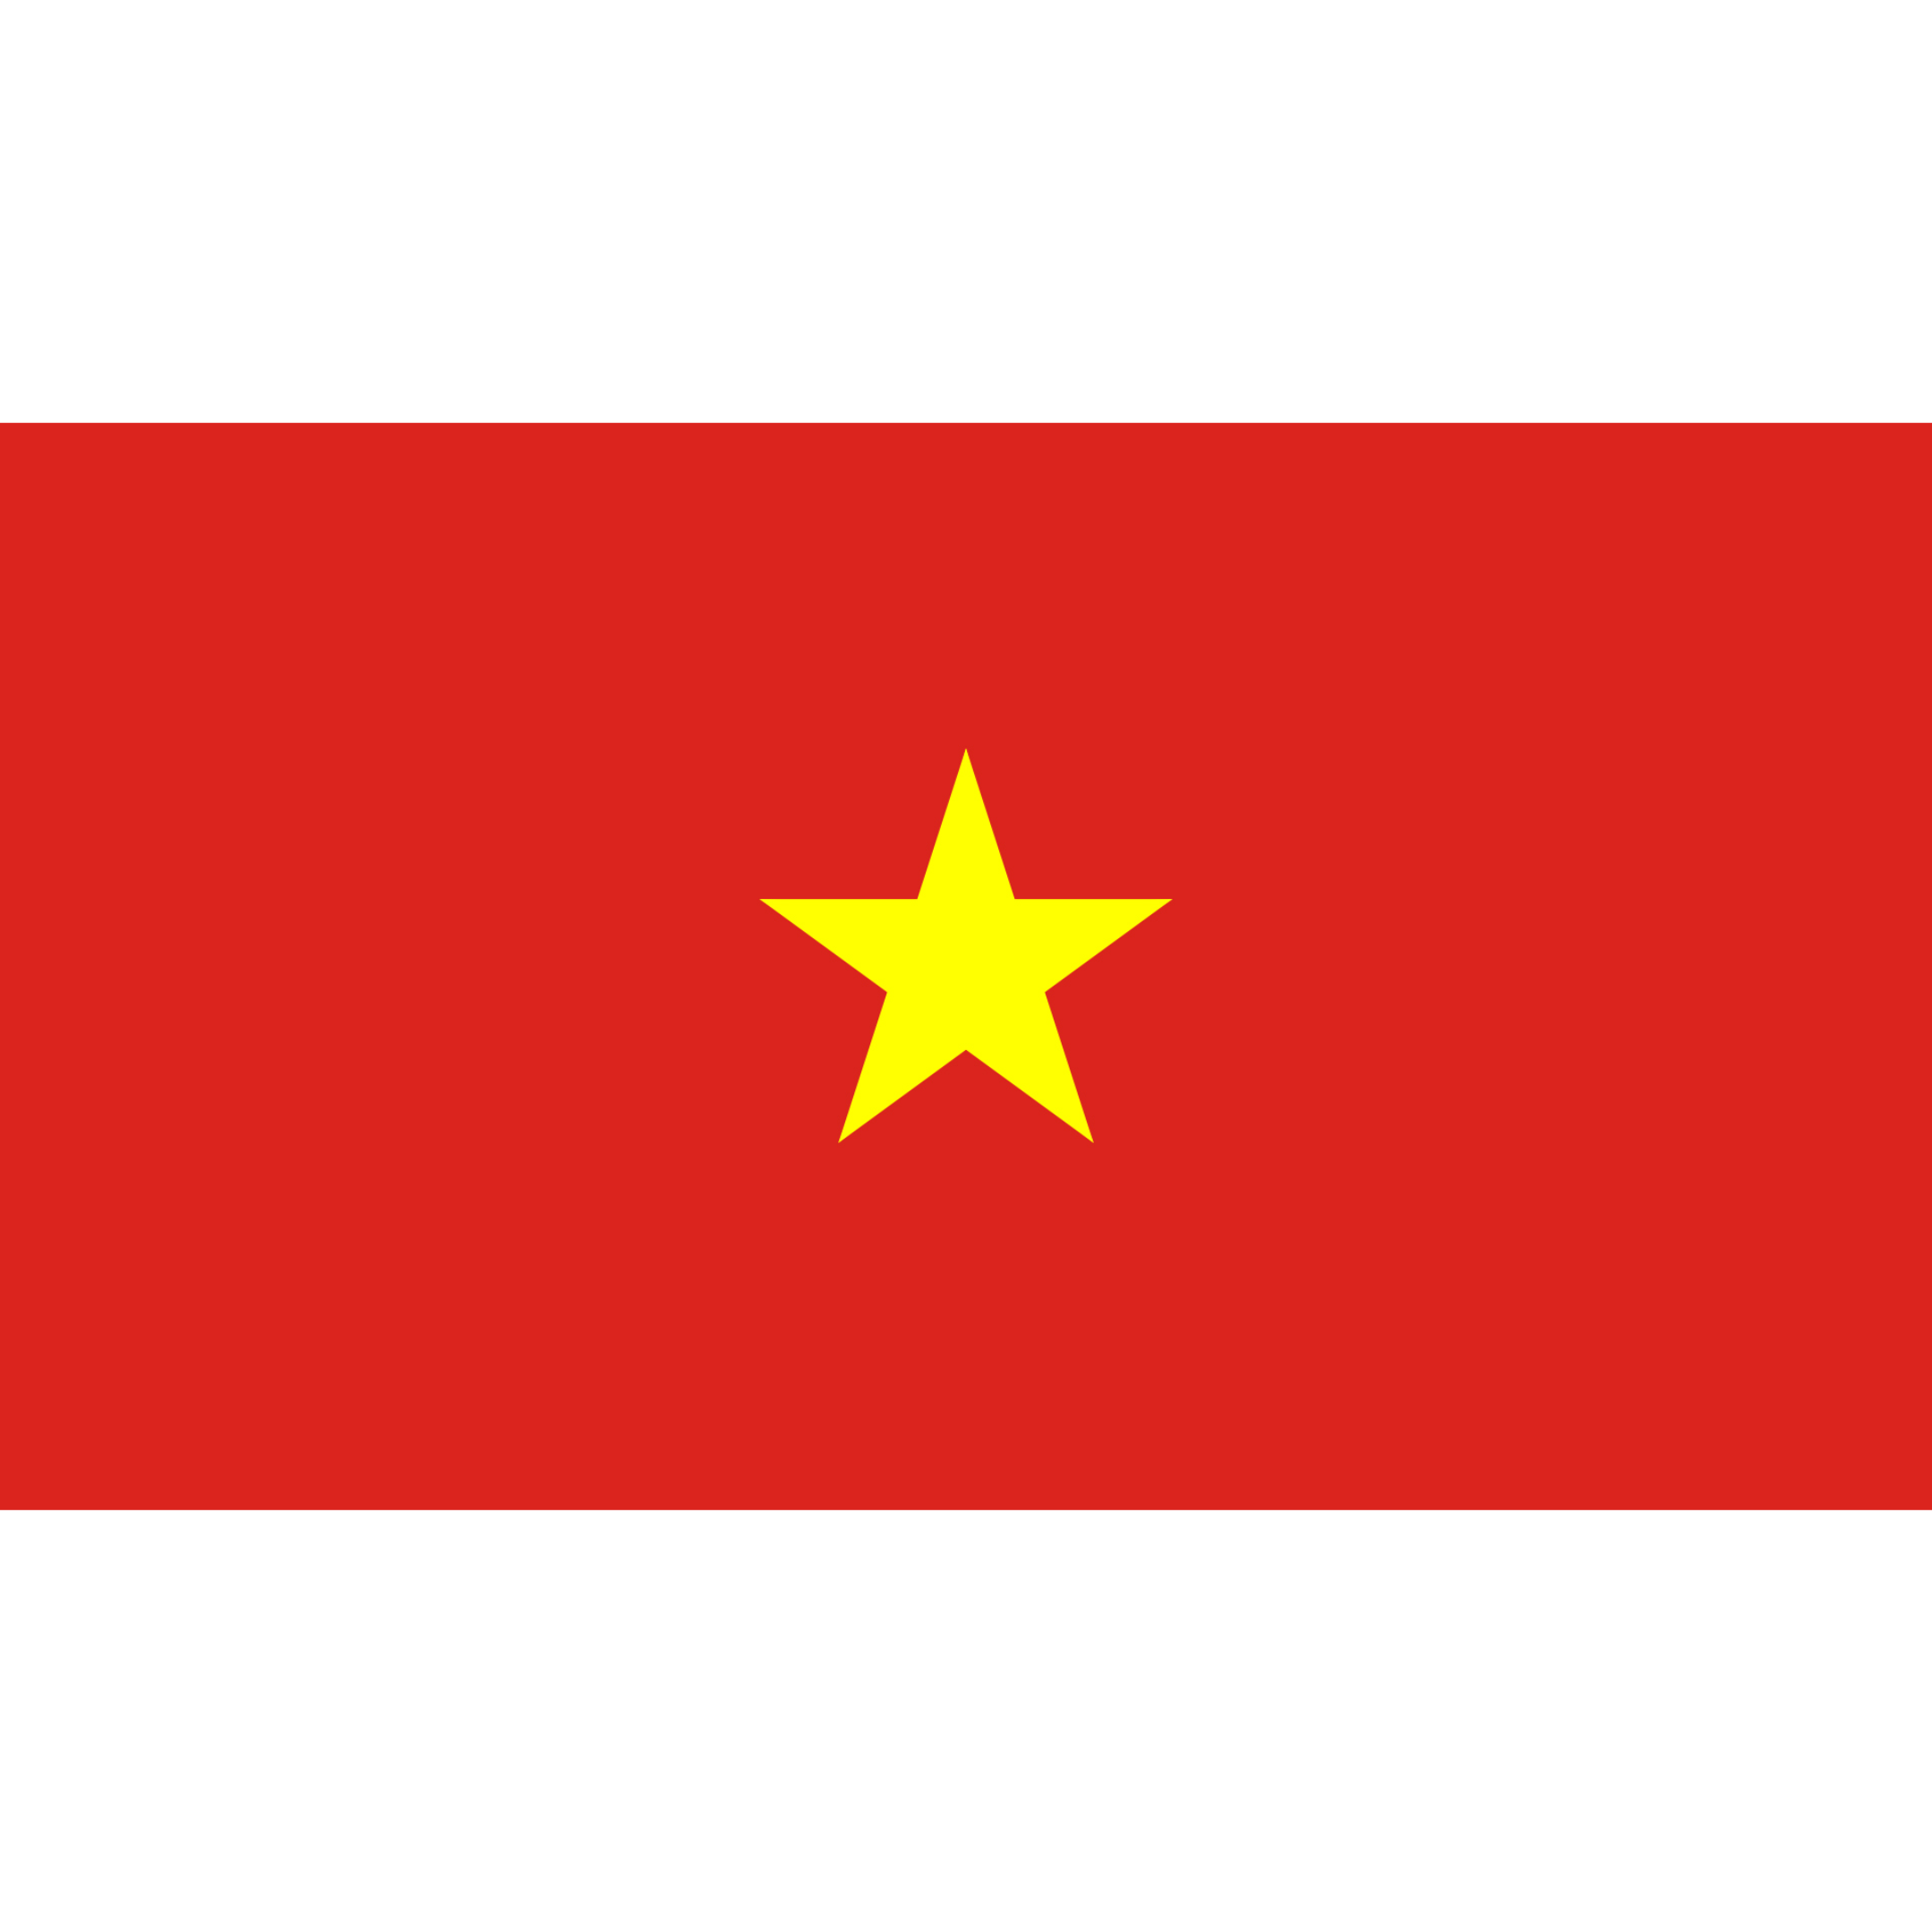 The Vietnamese flag is a red rectangle background with a gold star in the centre.